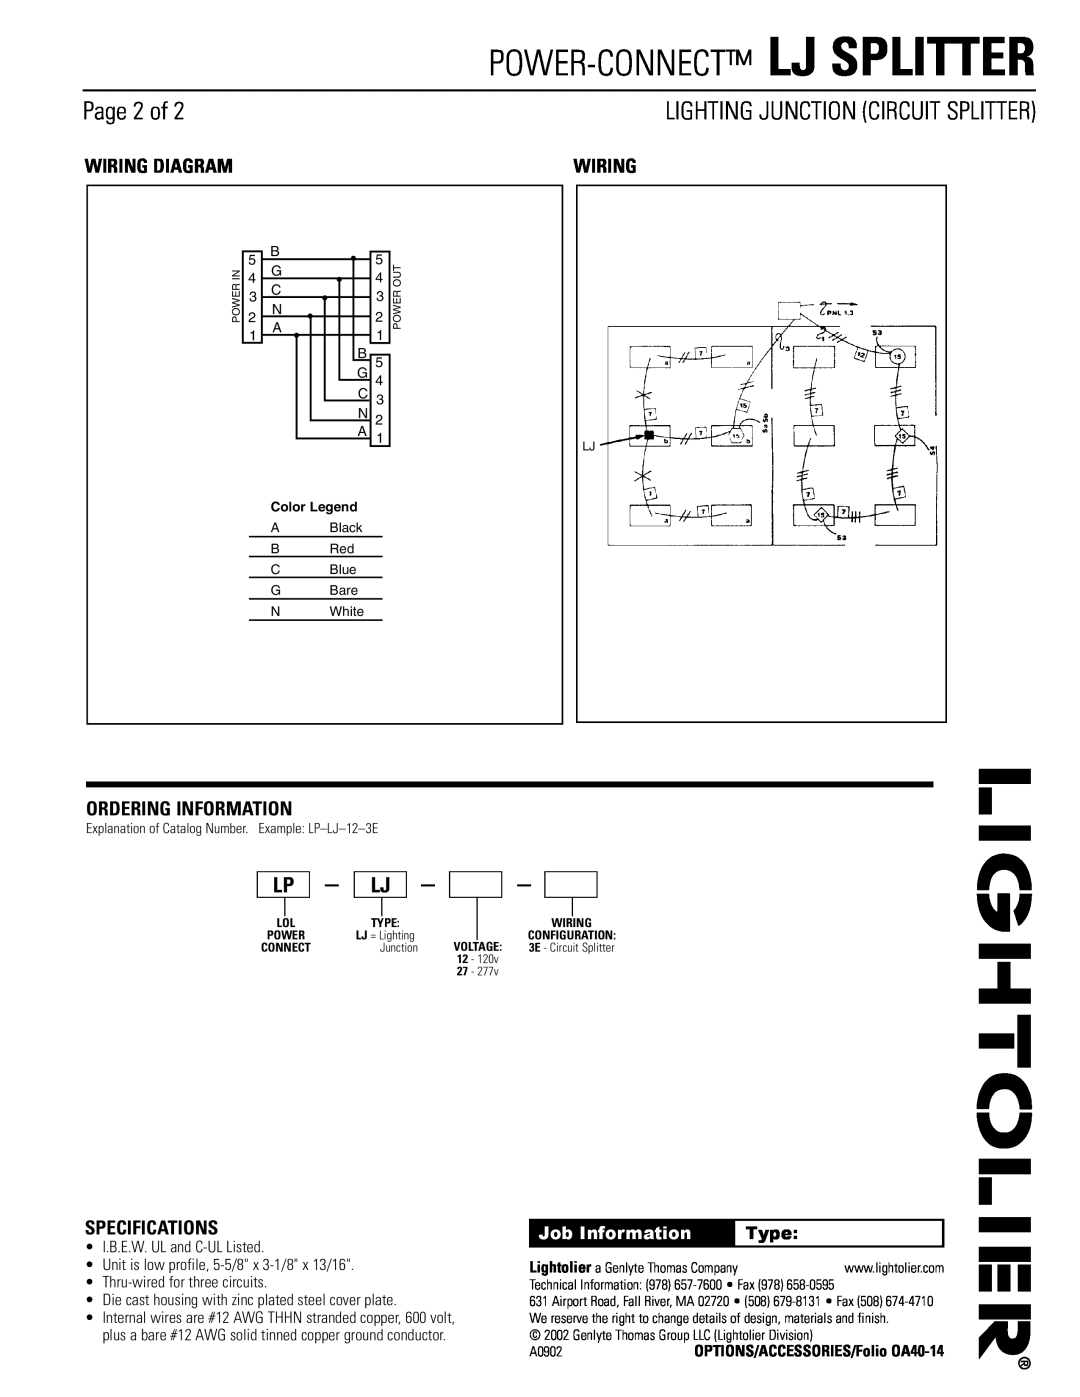 Lightolier LJ SPLITTER Page 2 of, Wiring Diagram, Ordering Information, Specifications, I.B.E.W. UL and C-ULListed, Type 